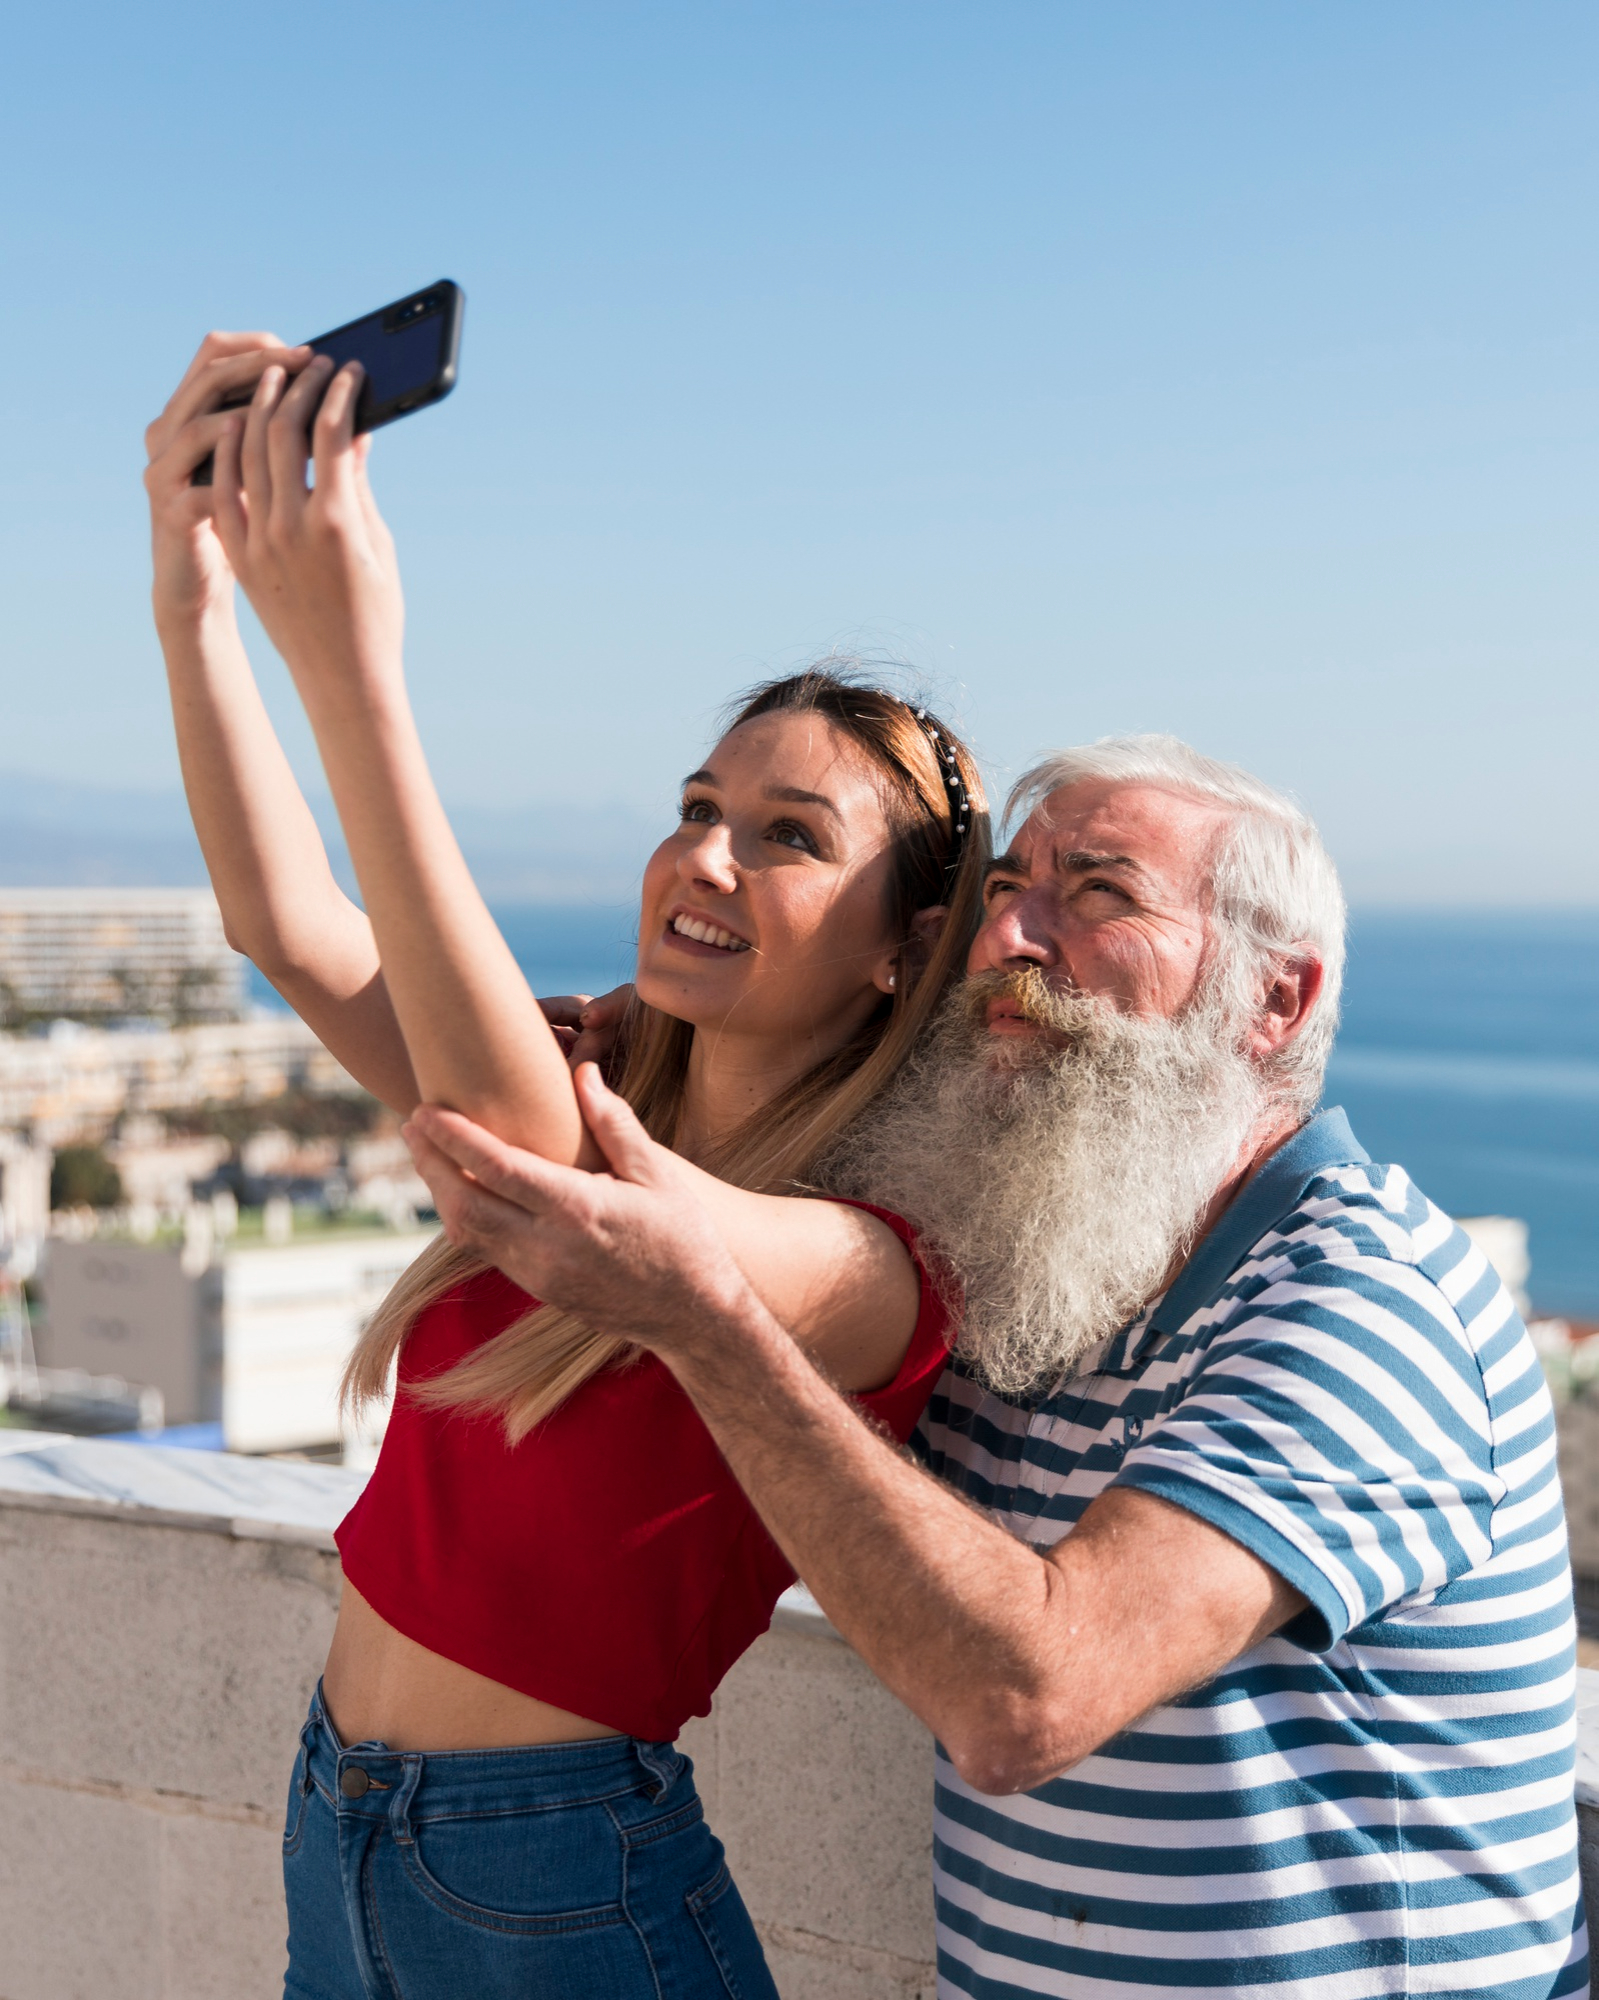 An older man taking a selfie with a young girl | Source: Freepik